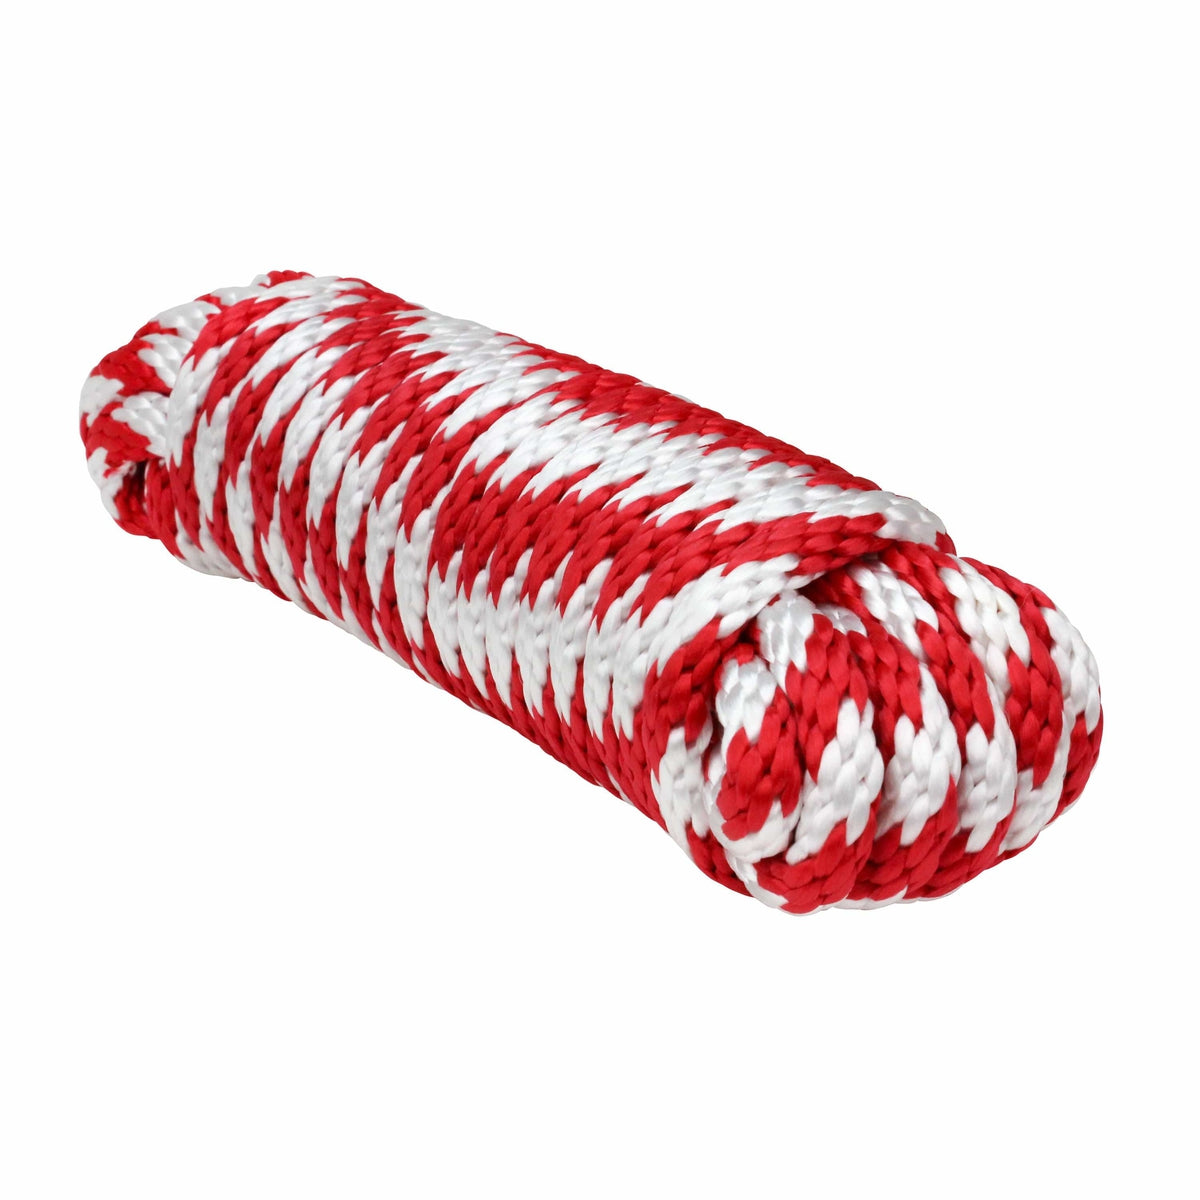 Extreme Max SB MFP Utility Rope 5/8" 100' Red/White #3008.0189